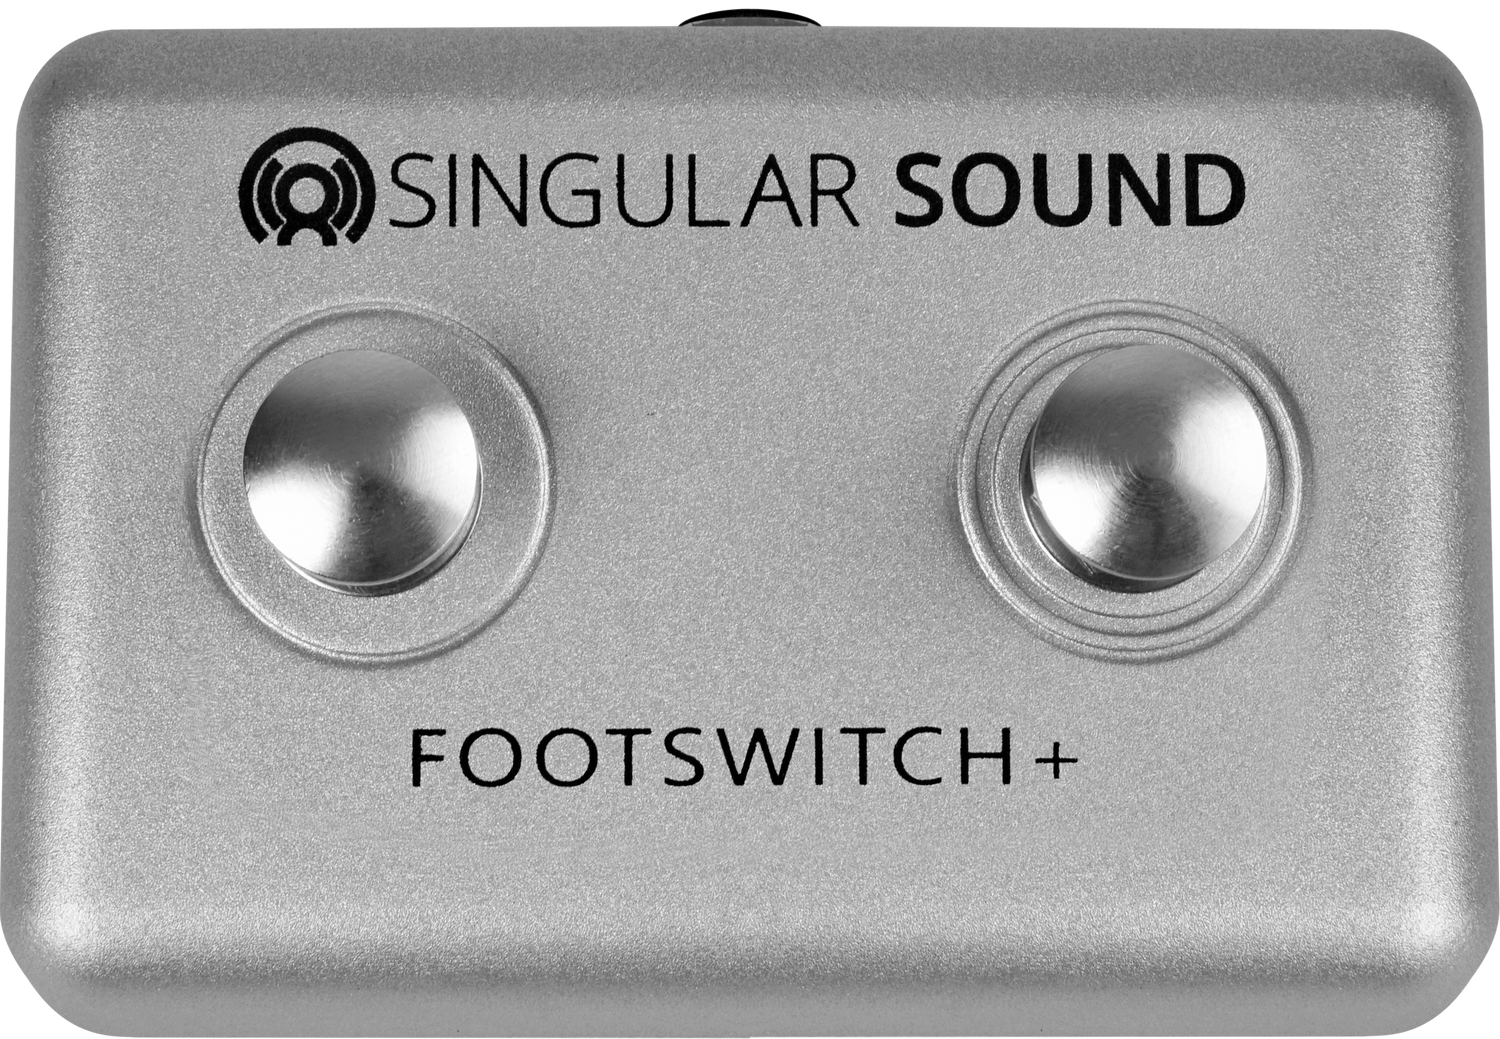 Footswitch+: 4 Ways to Master Your Foot Switch Pedal